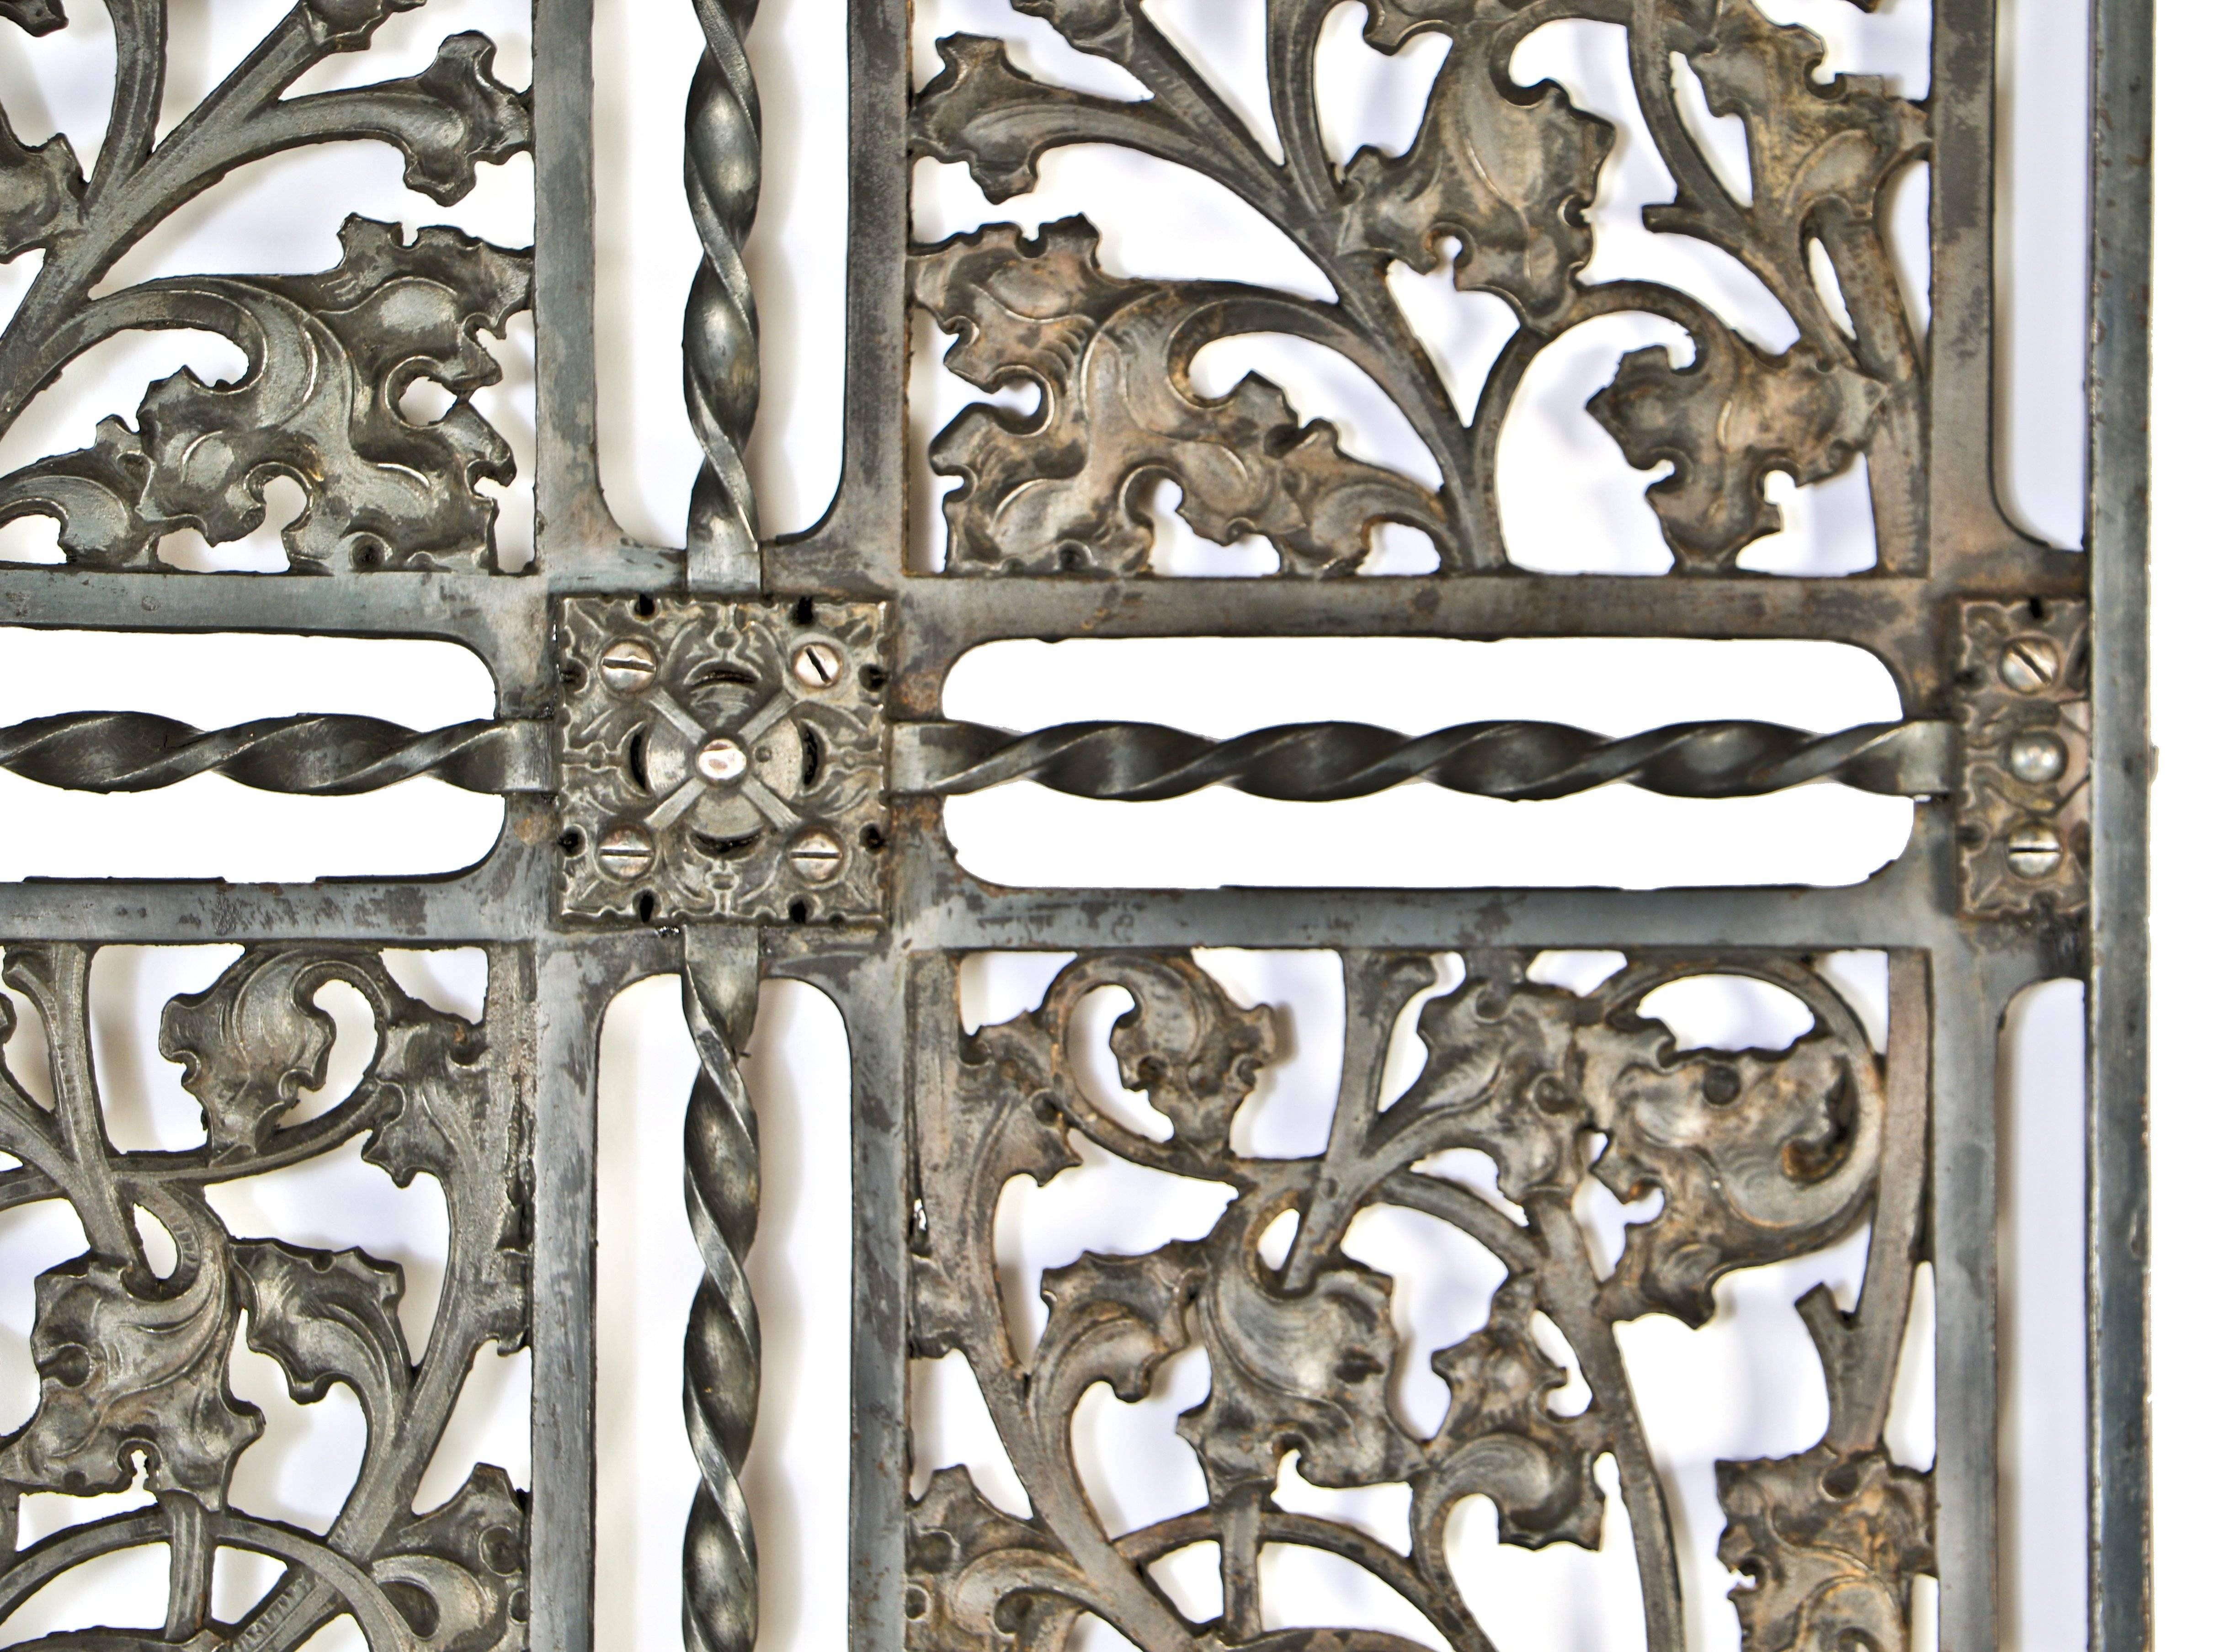 original circa 1896 striking Gothic style ornamental cast iron interior elevator door, removed from the historic fisher building lobby during renovations and/or upgrades. the elevator door has six deep relief panels featuring a remarkably